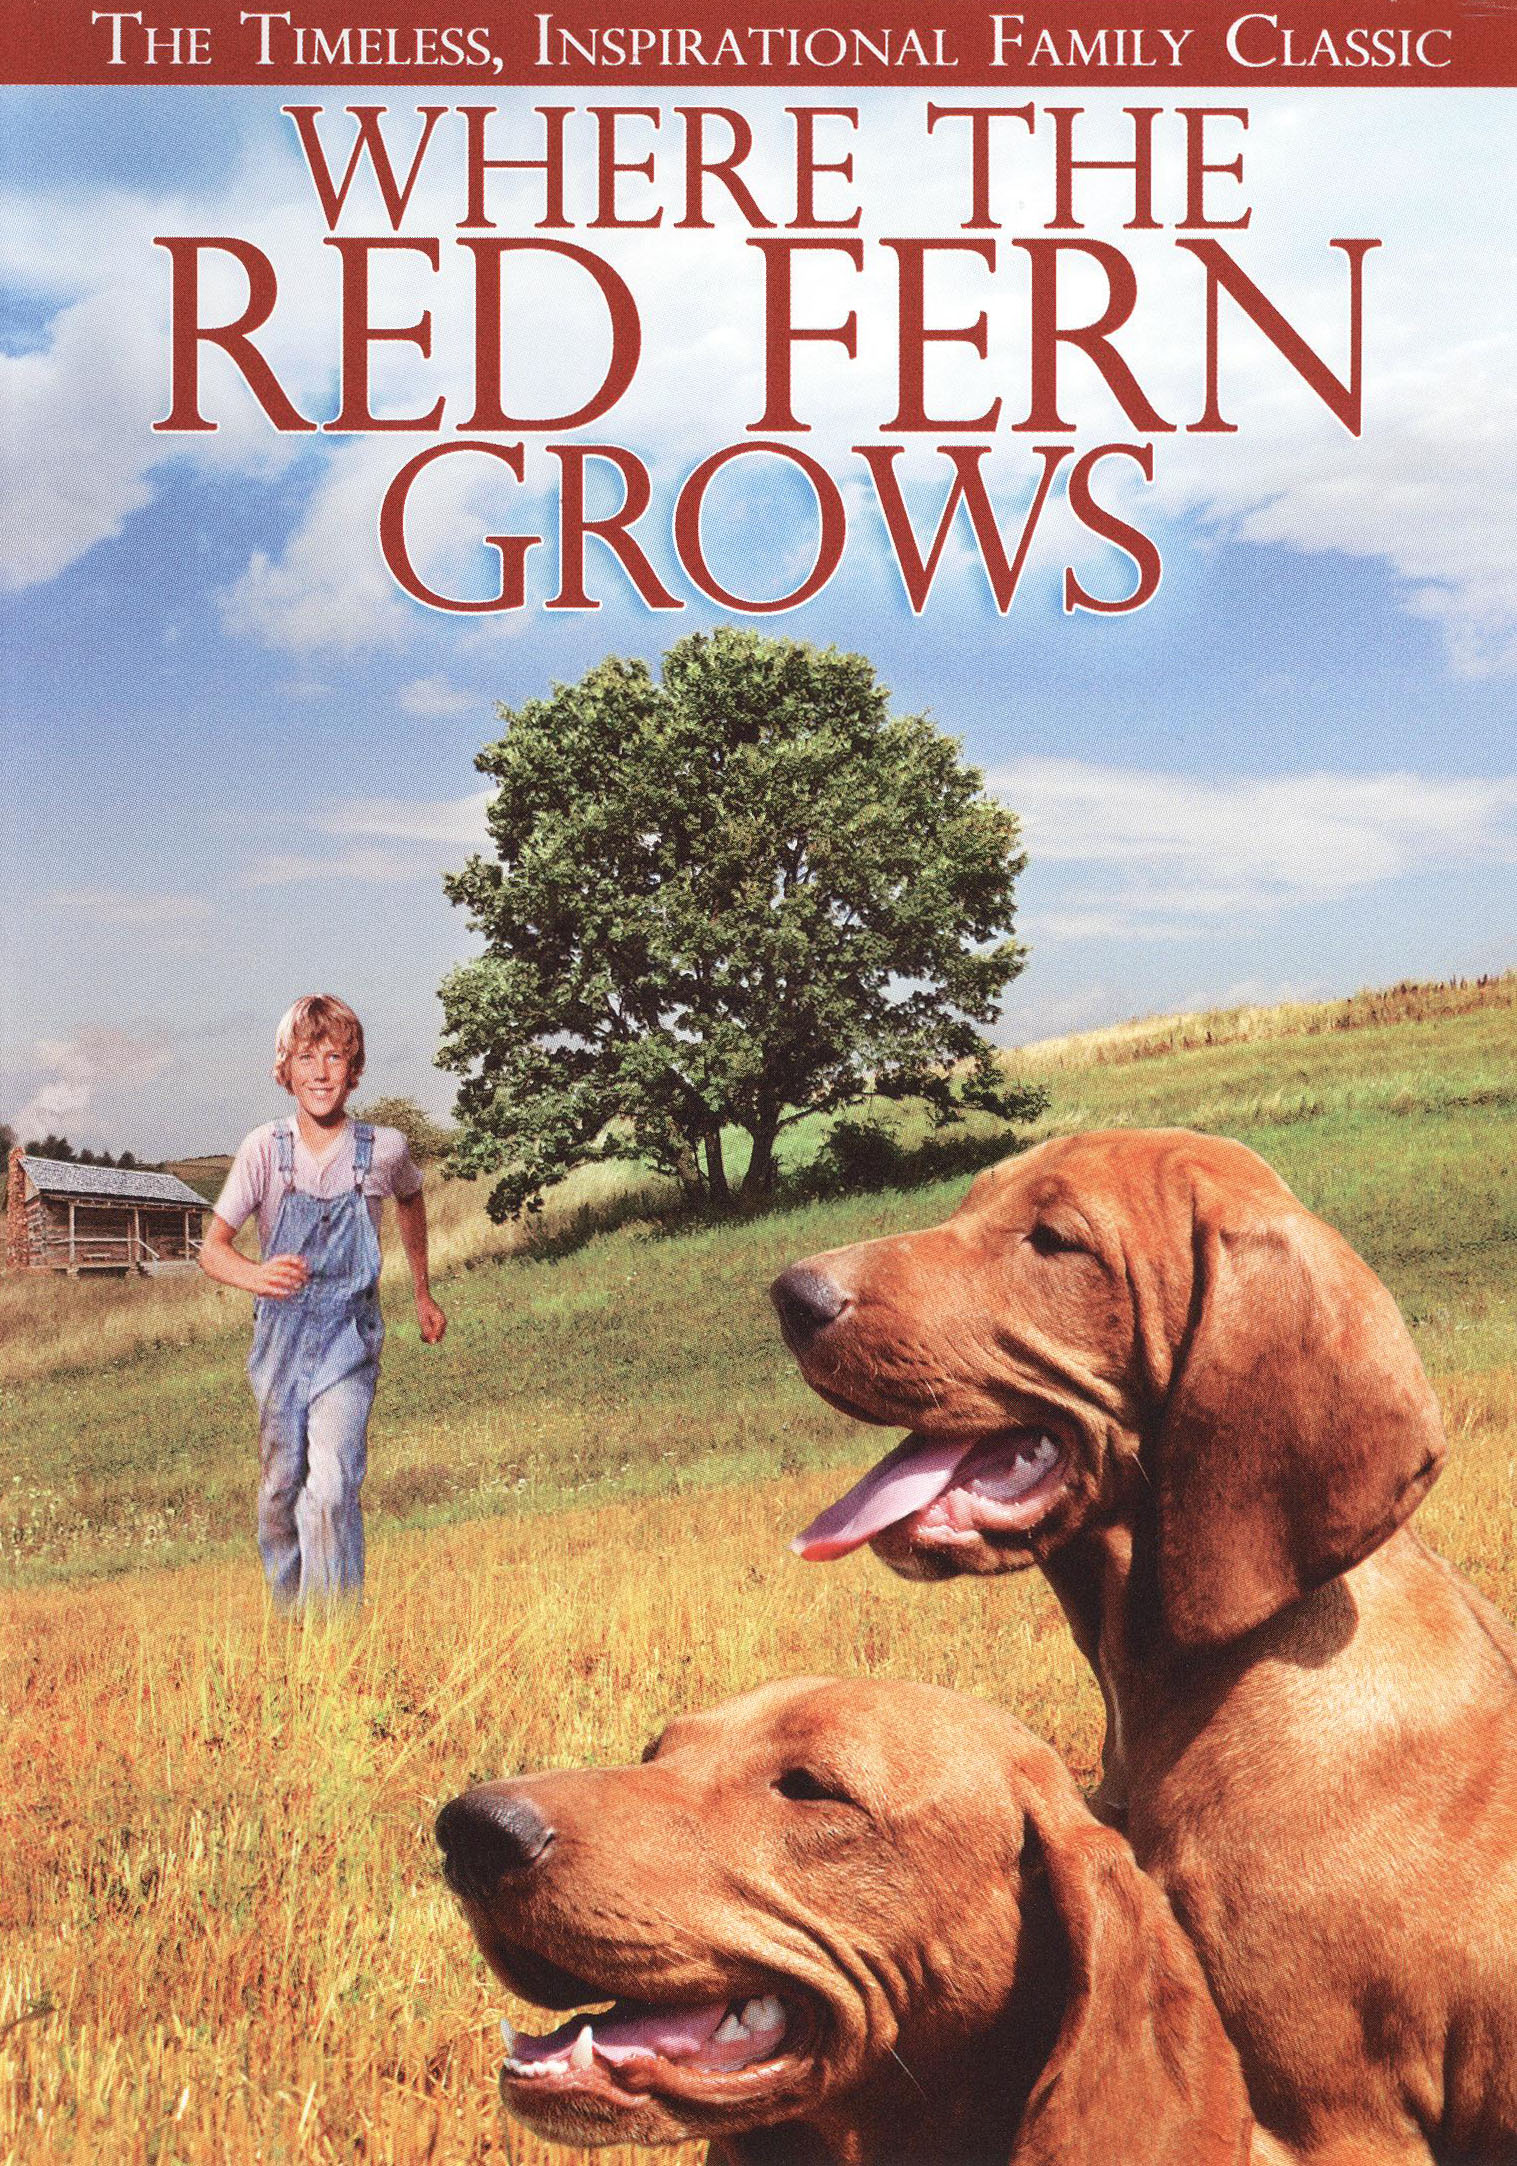 where the red fern grows movie review